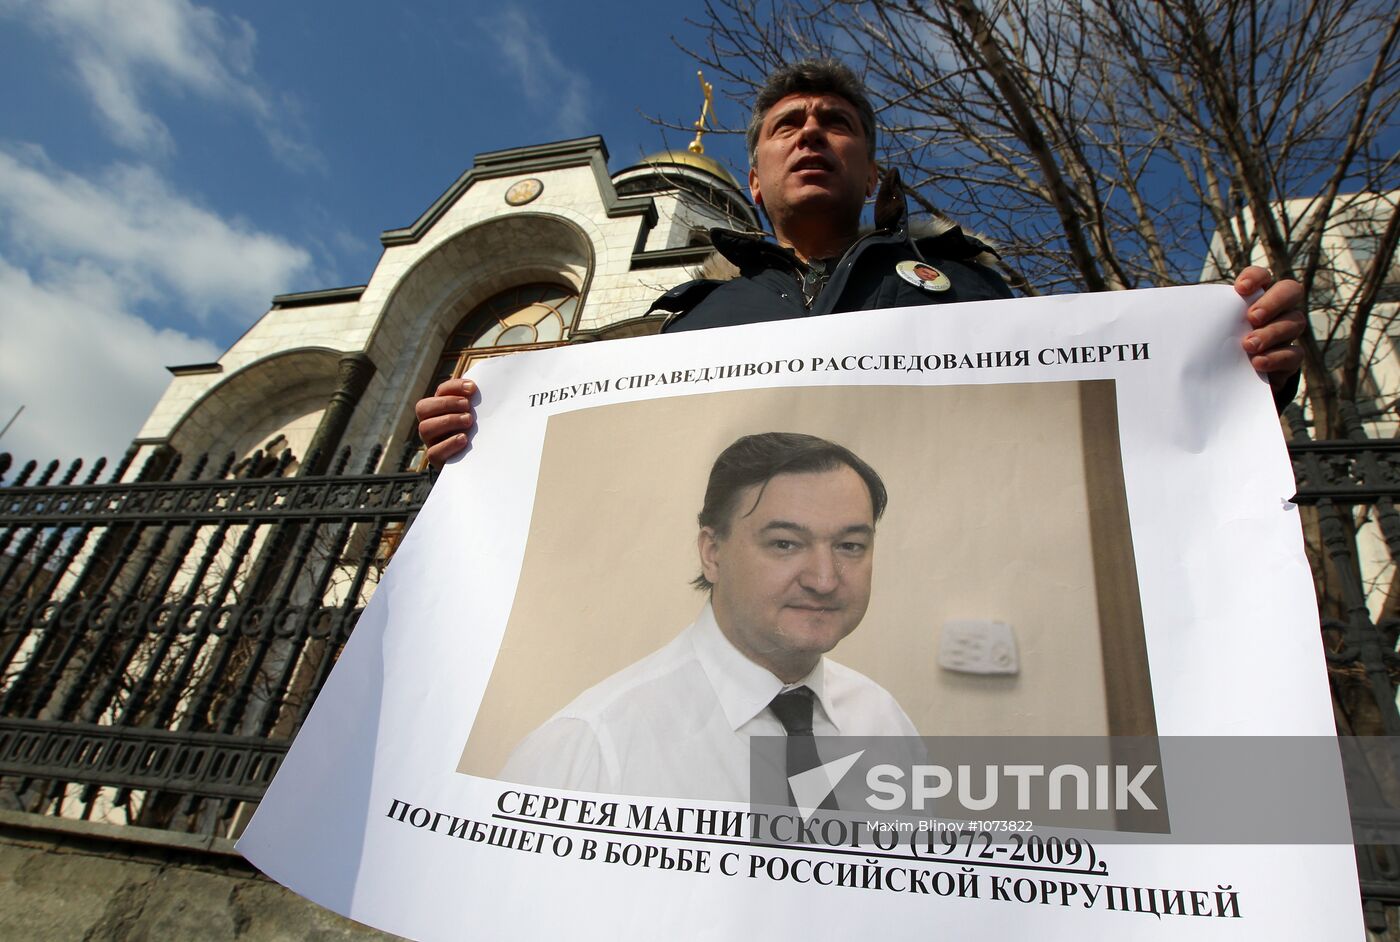 Protest against police lawlessness in Magnitsky's case